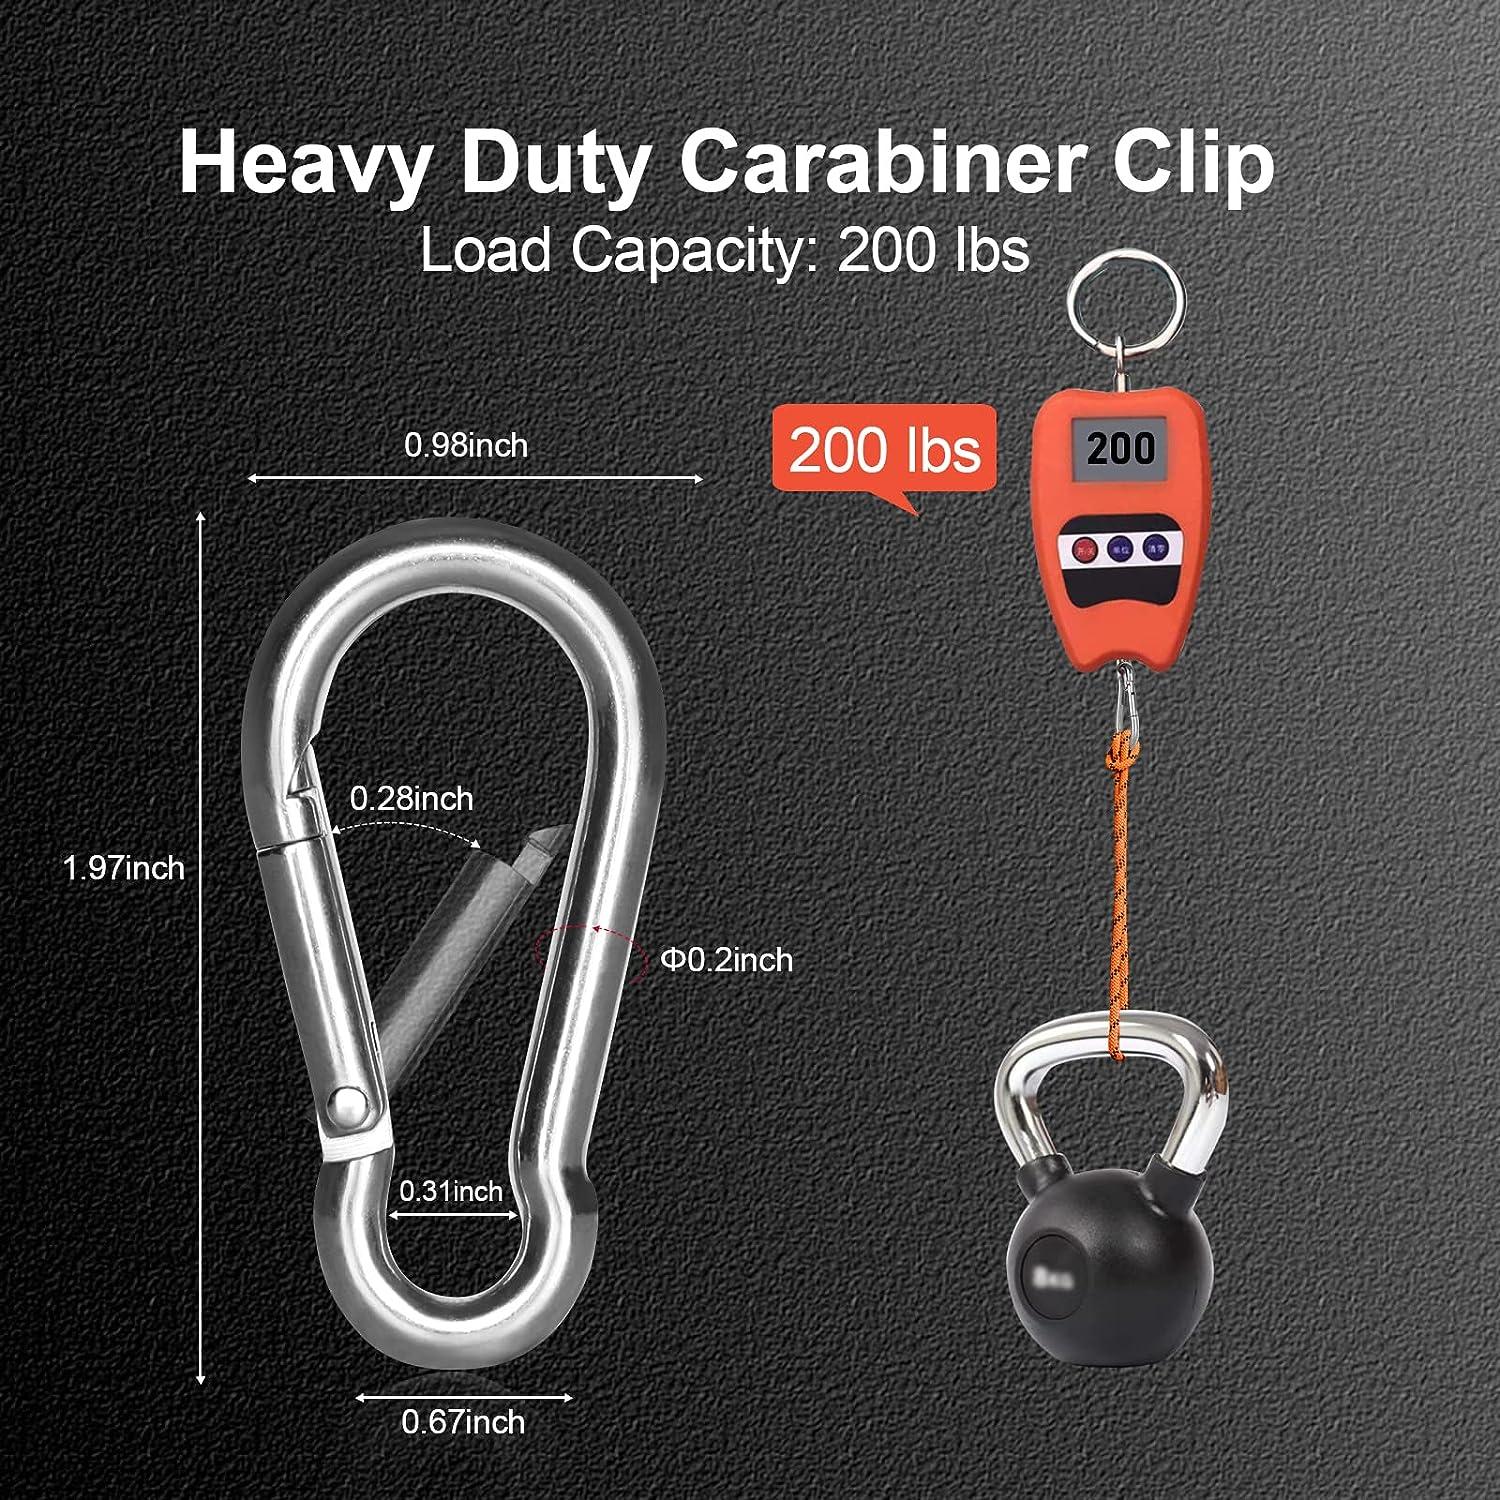 Kinklink 10 Pack 304 Stainless Steel Carabiner Clip, 1.97 inch Heavy Duty Spring  Snap Hook, Small Caribeener Clips for Outdoor Camping, Swing Set, Hammock,  Hiking Travel, Fishing, Quick Link Keychain 1.97inch 10